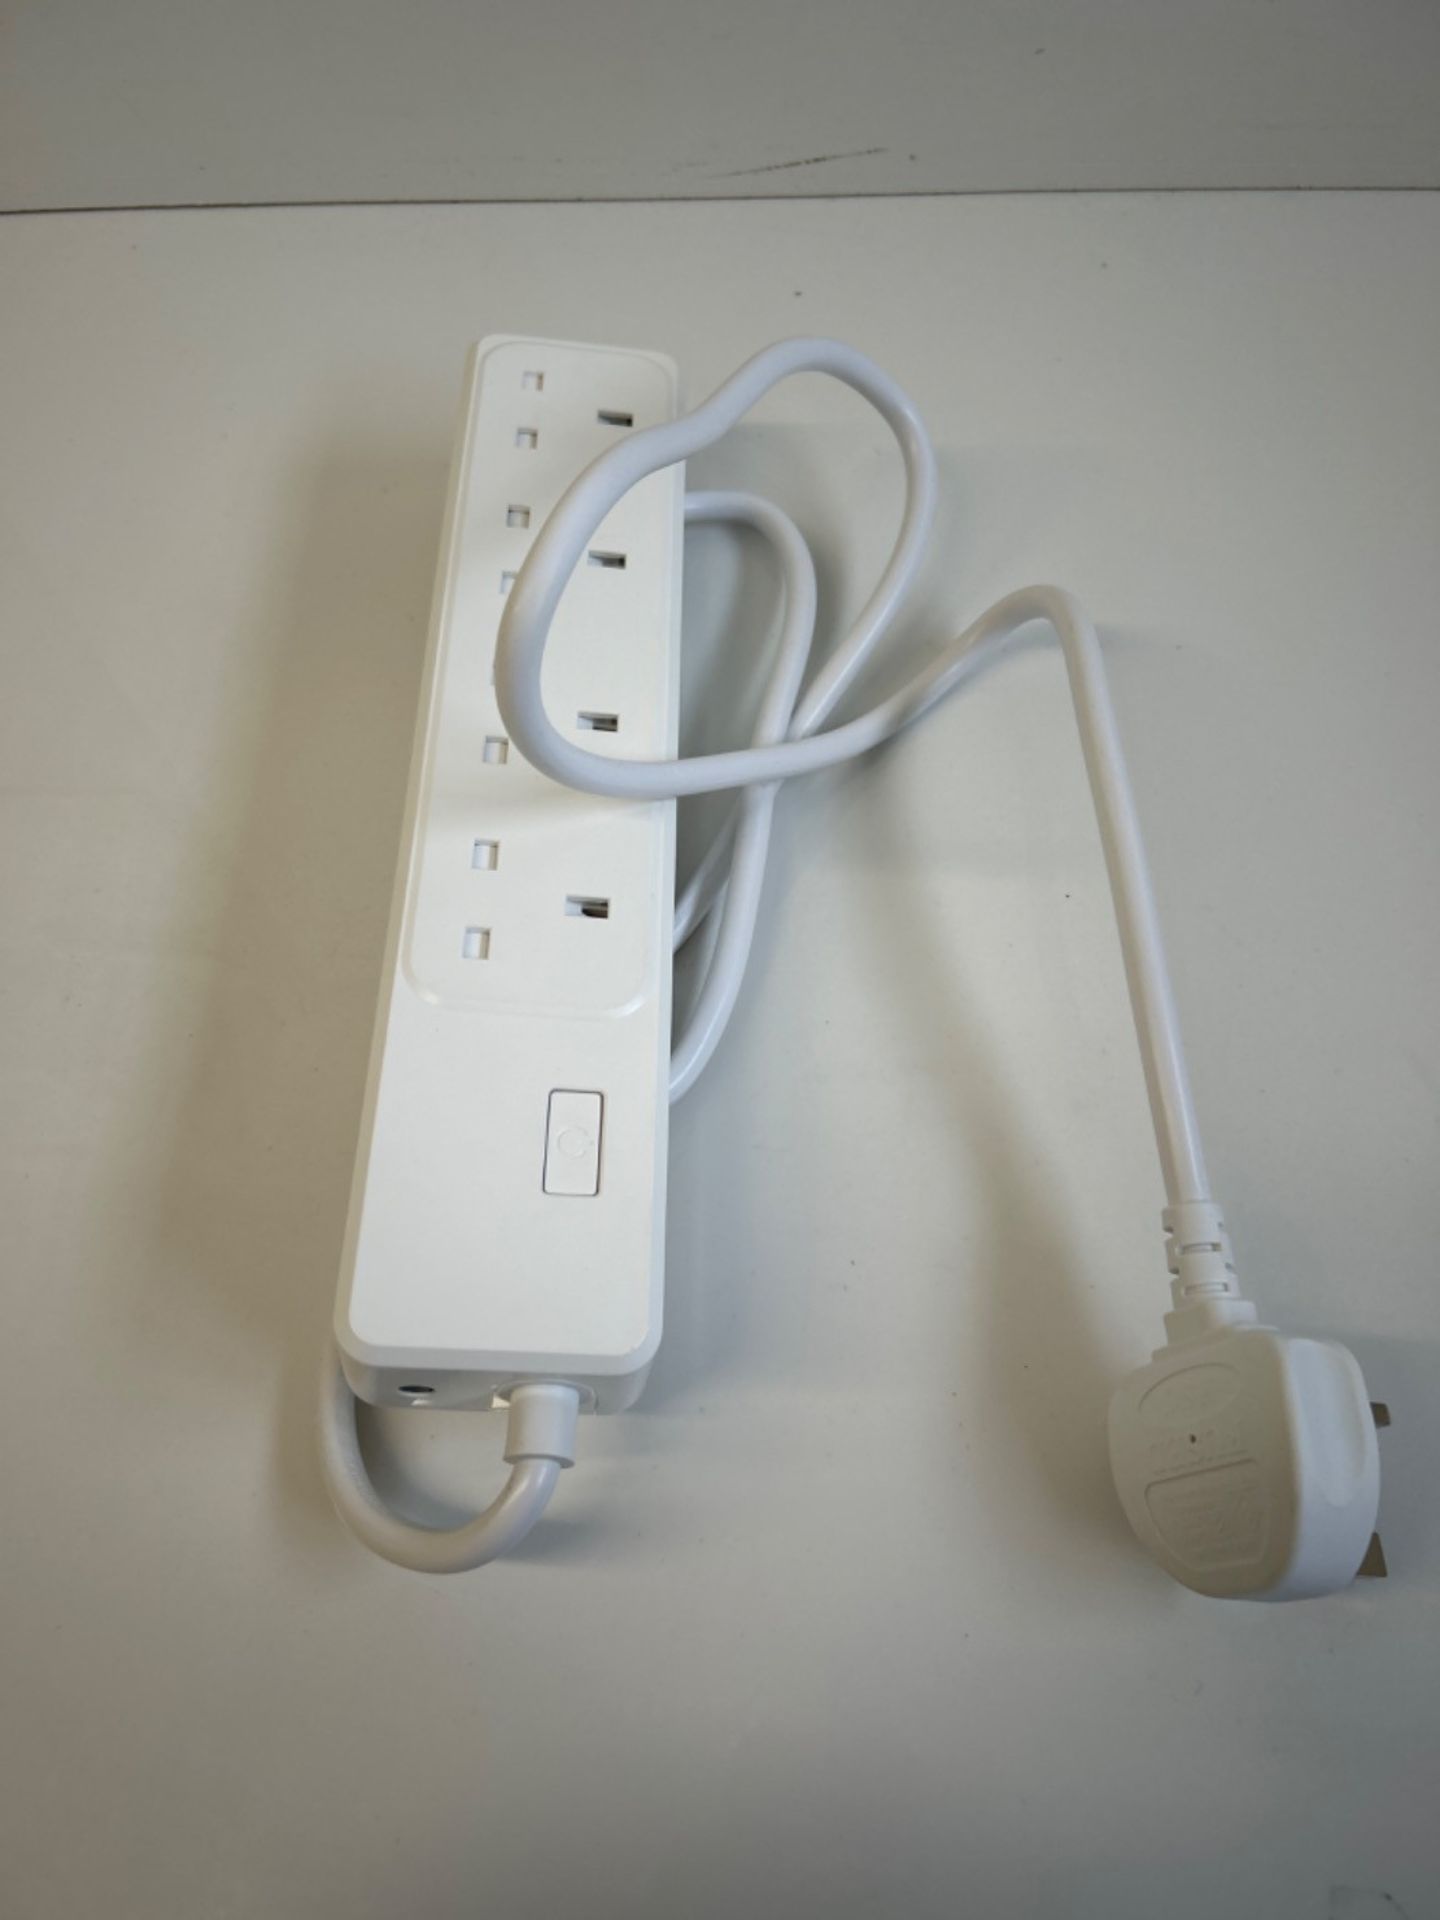 Smart Power Strip WiFi Plug - Smart Outlets Smart Extension Lead 1.8m with 4 AC Outlets, Compatible - Image 2 of 3